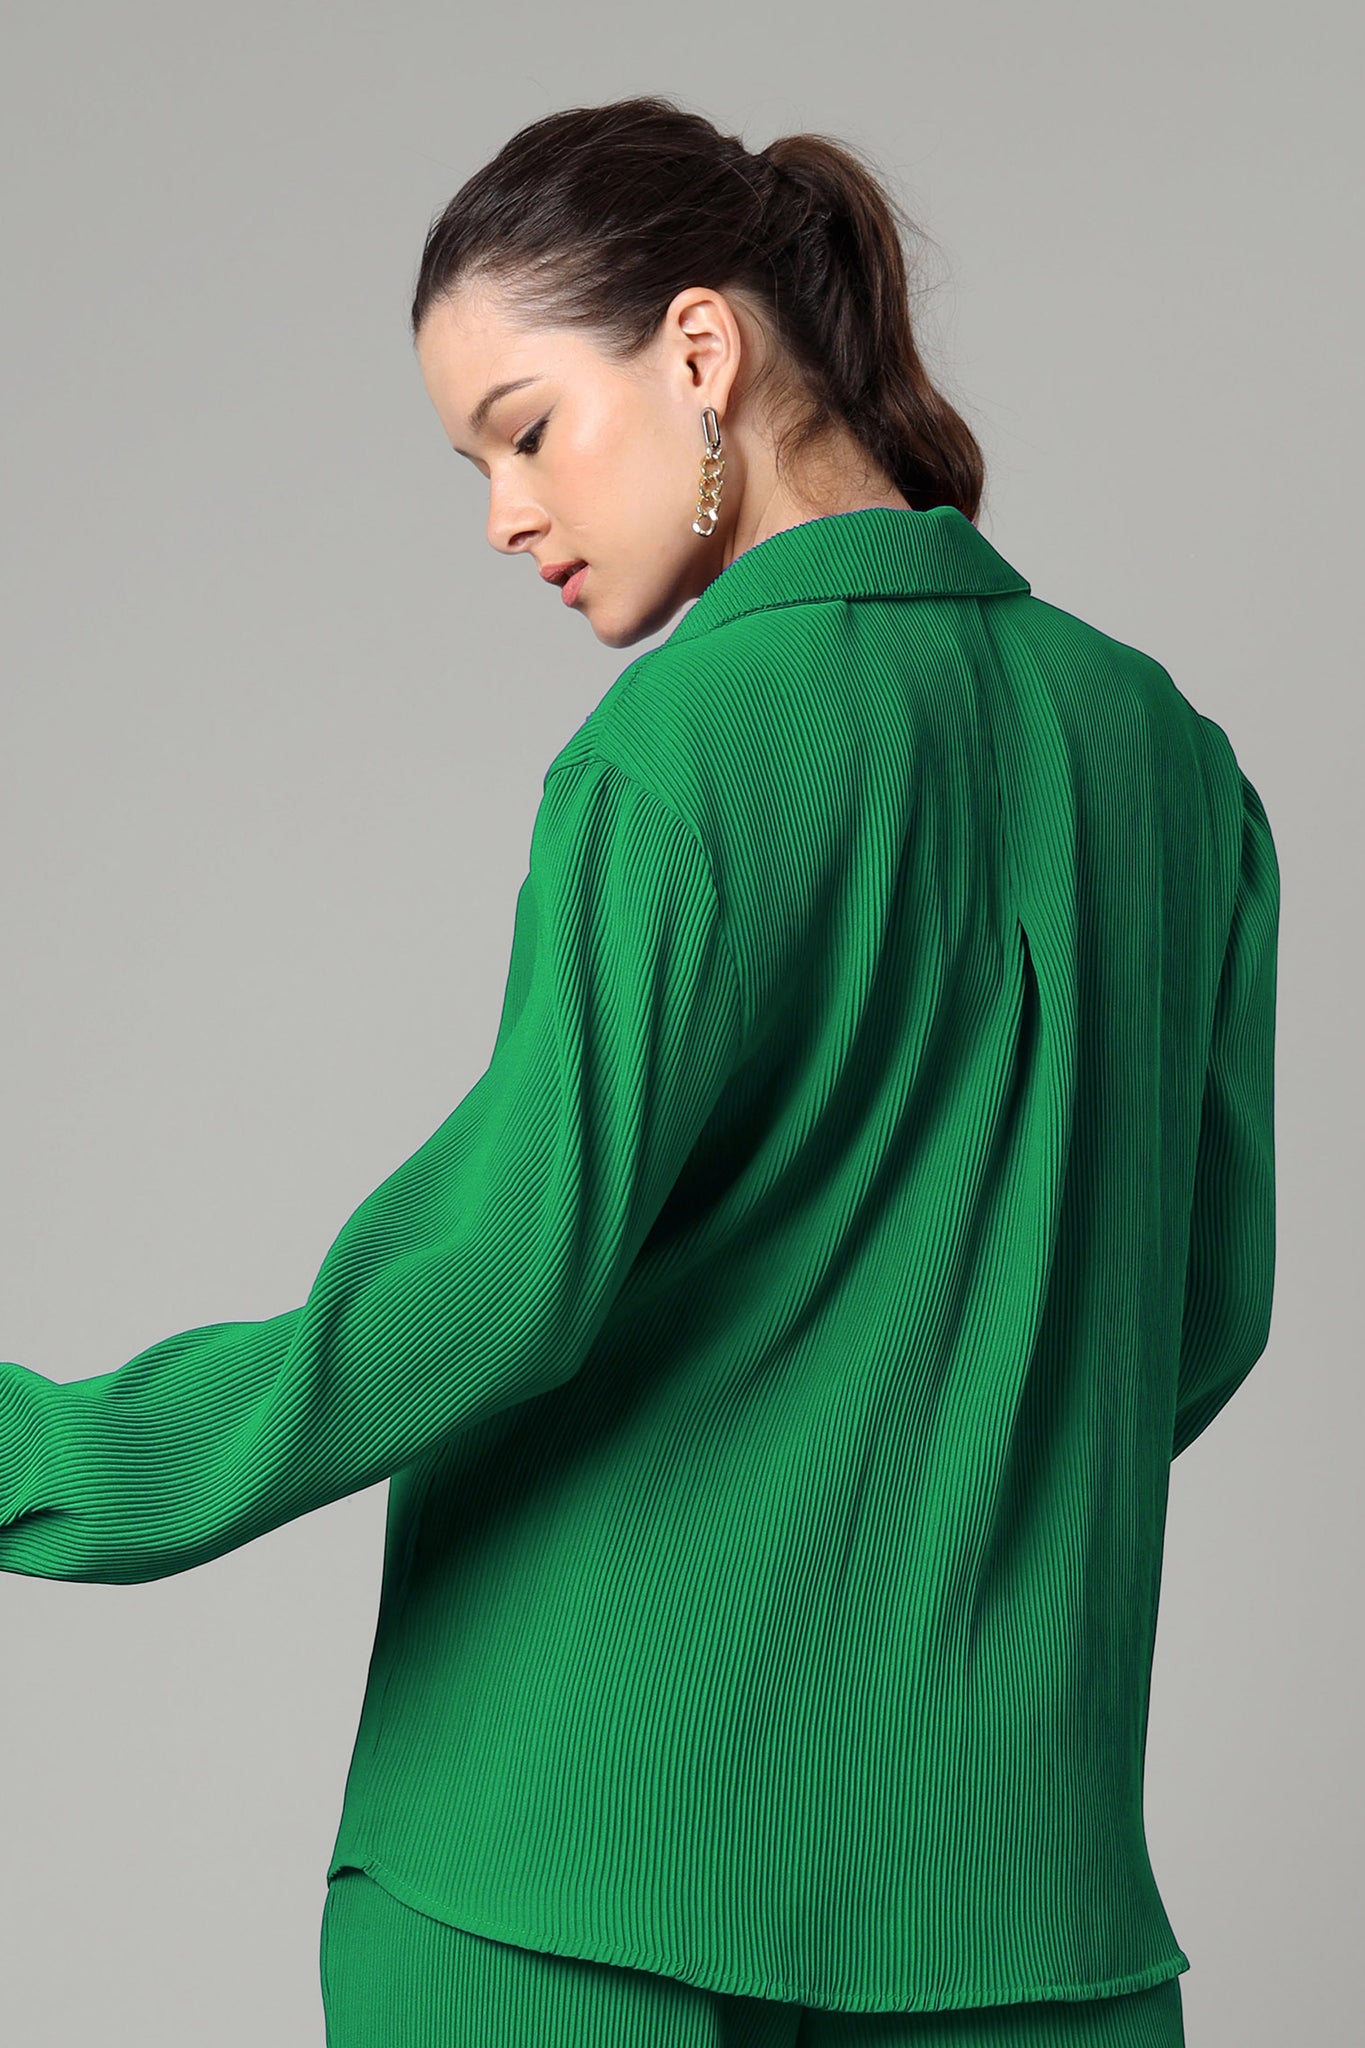 Exclusive Emerald Pleated Shirt For Women